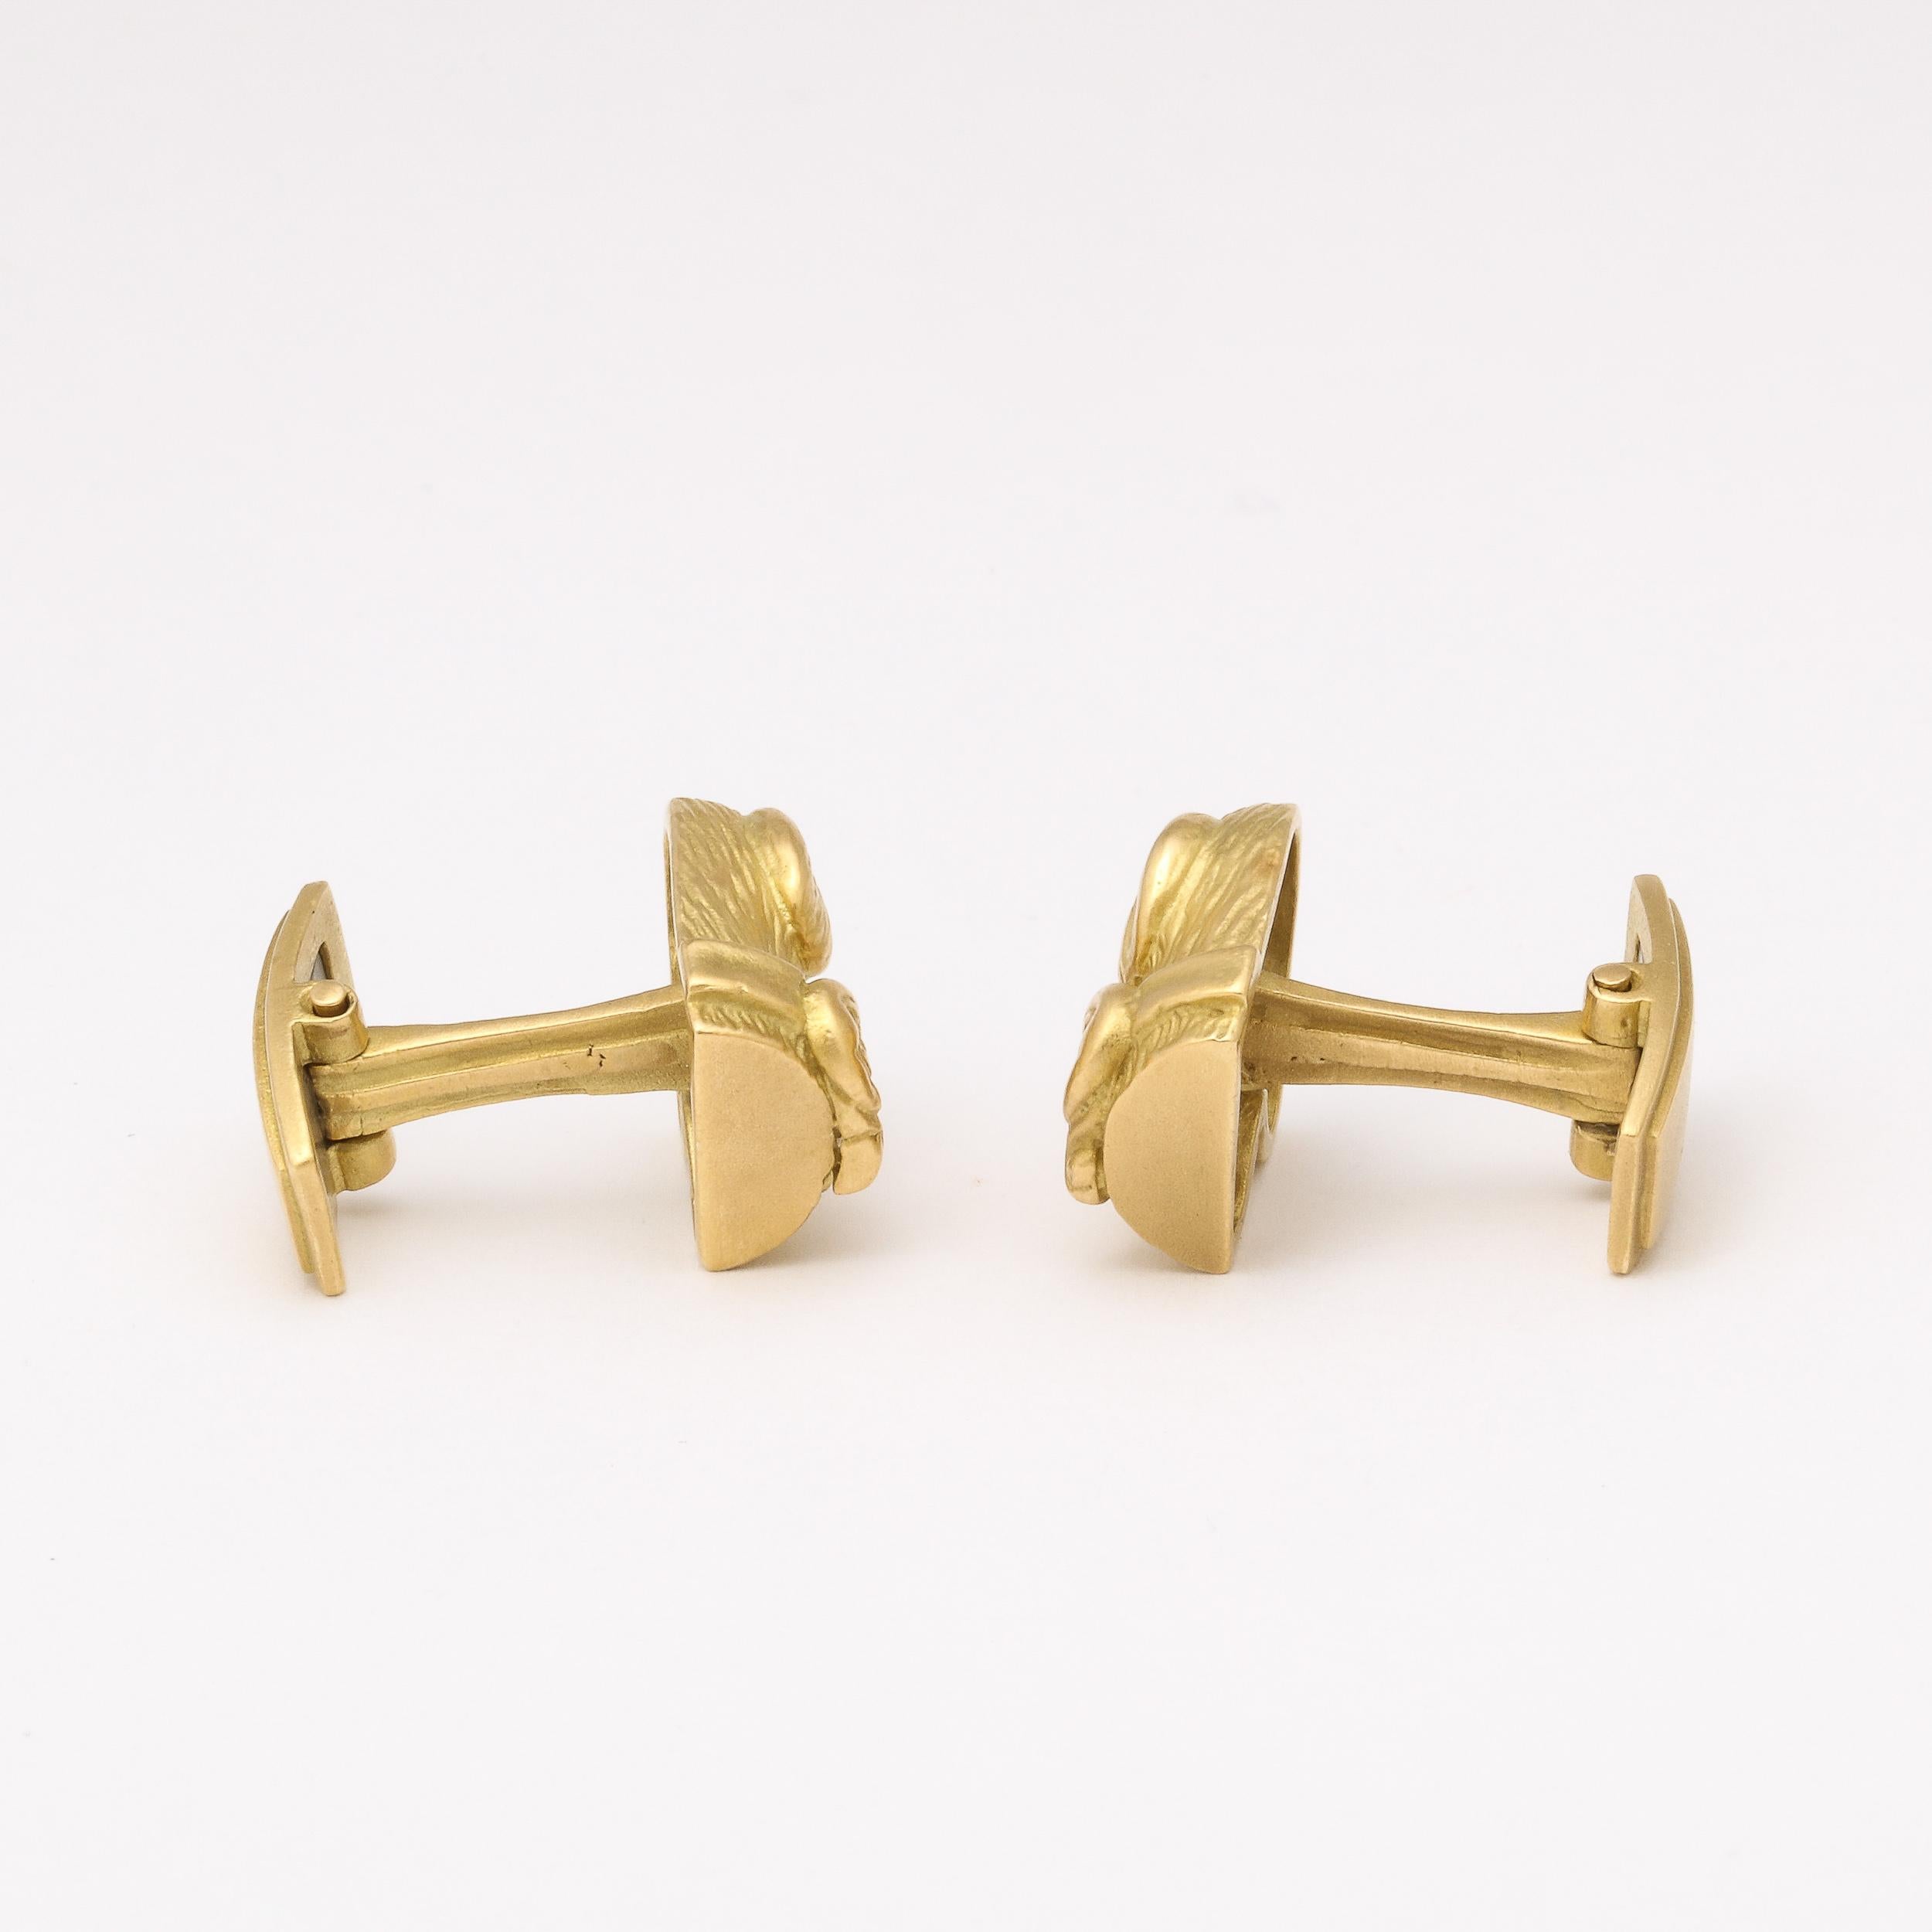 Modernist Cufflinks with Golden Retriever Canine Motif in 14 Carat Yellow Gold For Sale 2